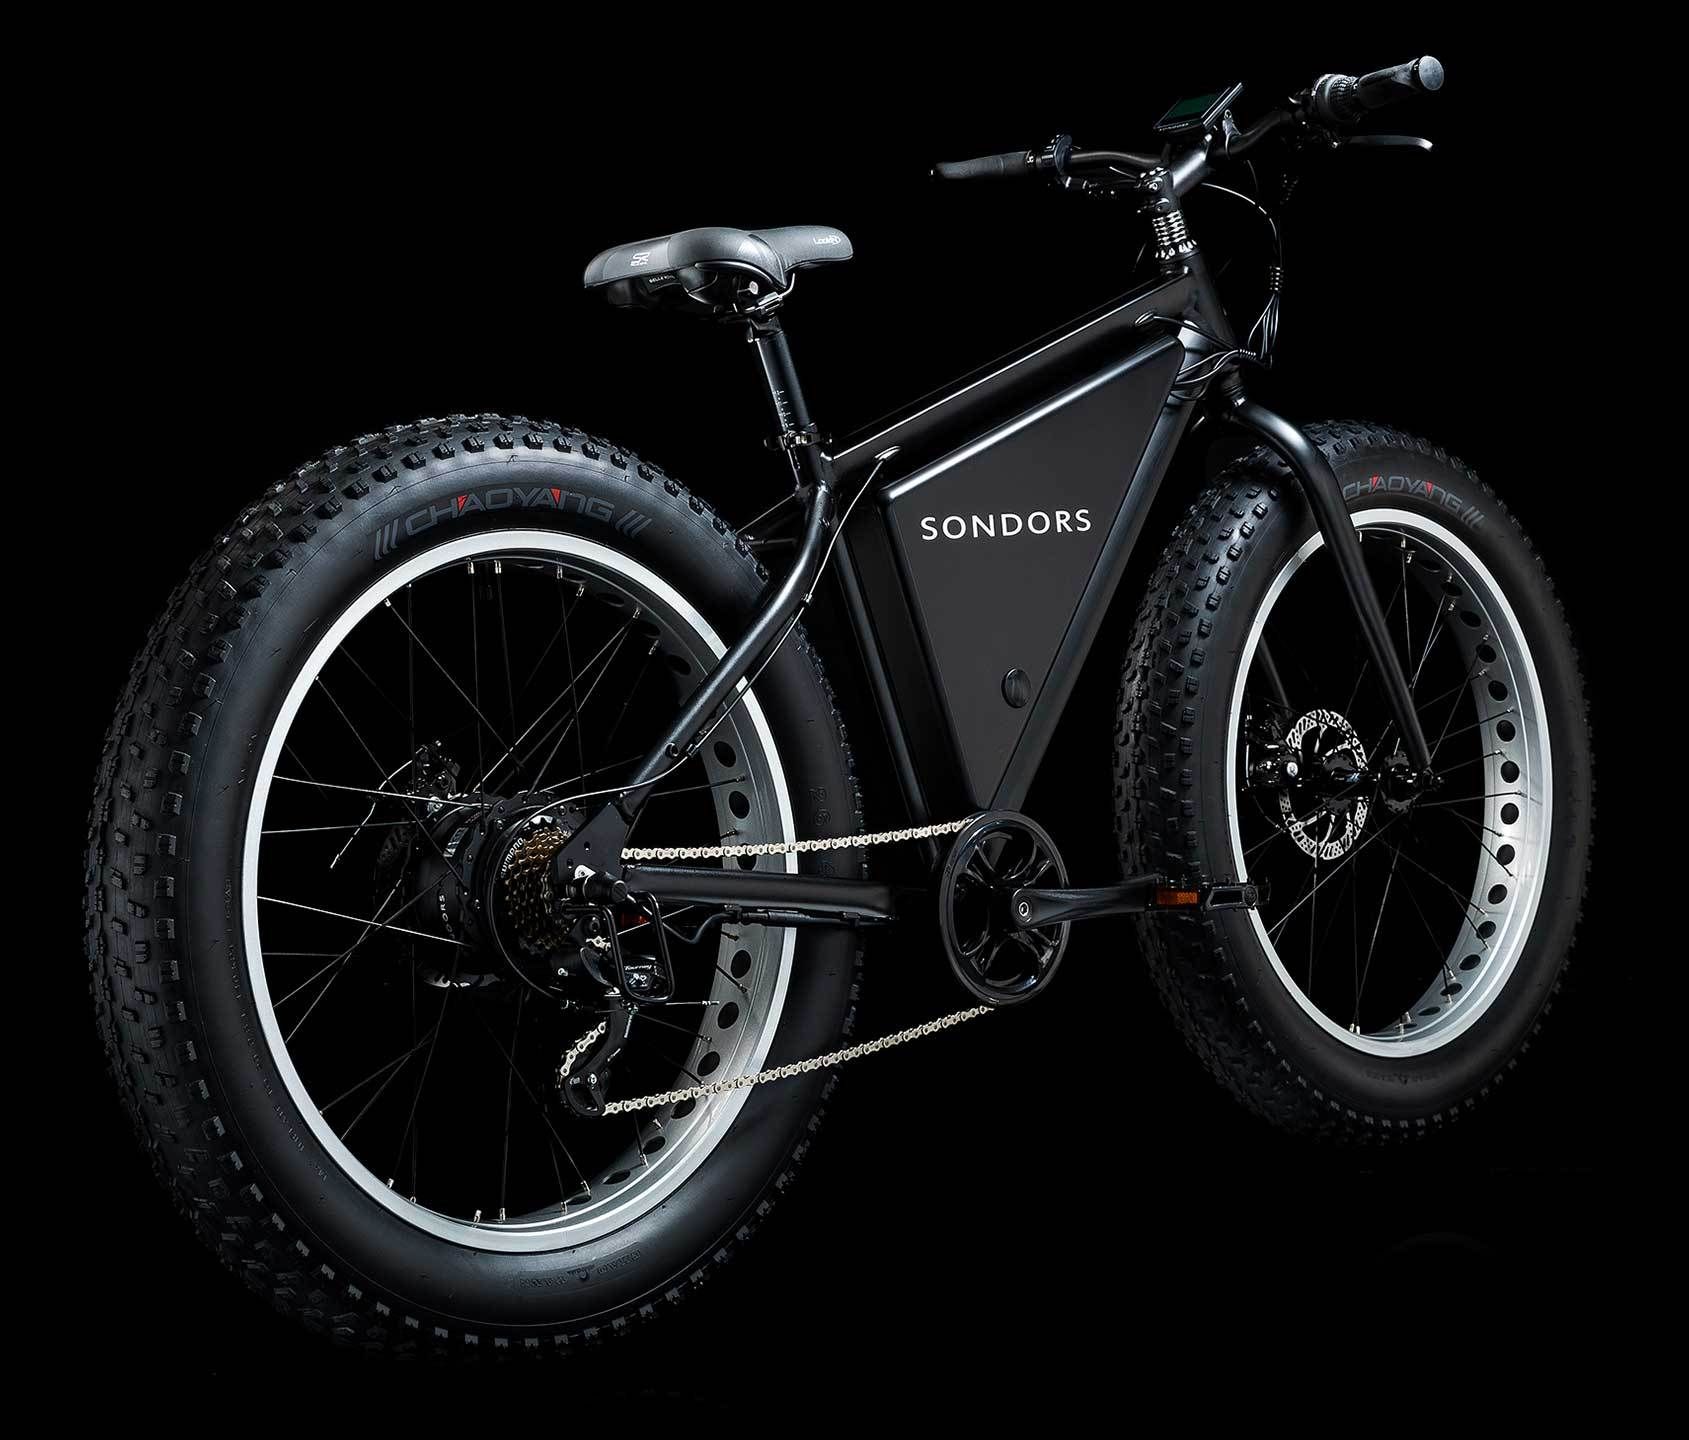 electric bicycle low price